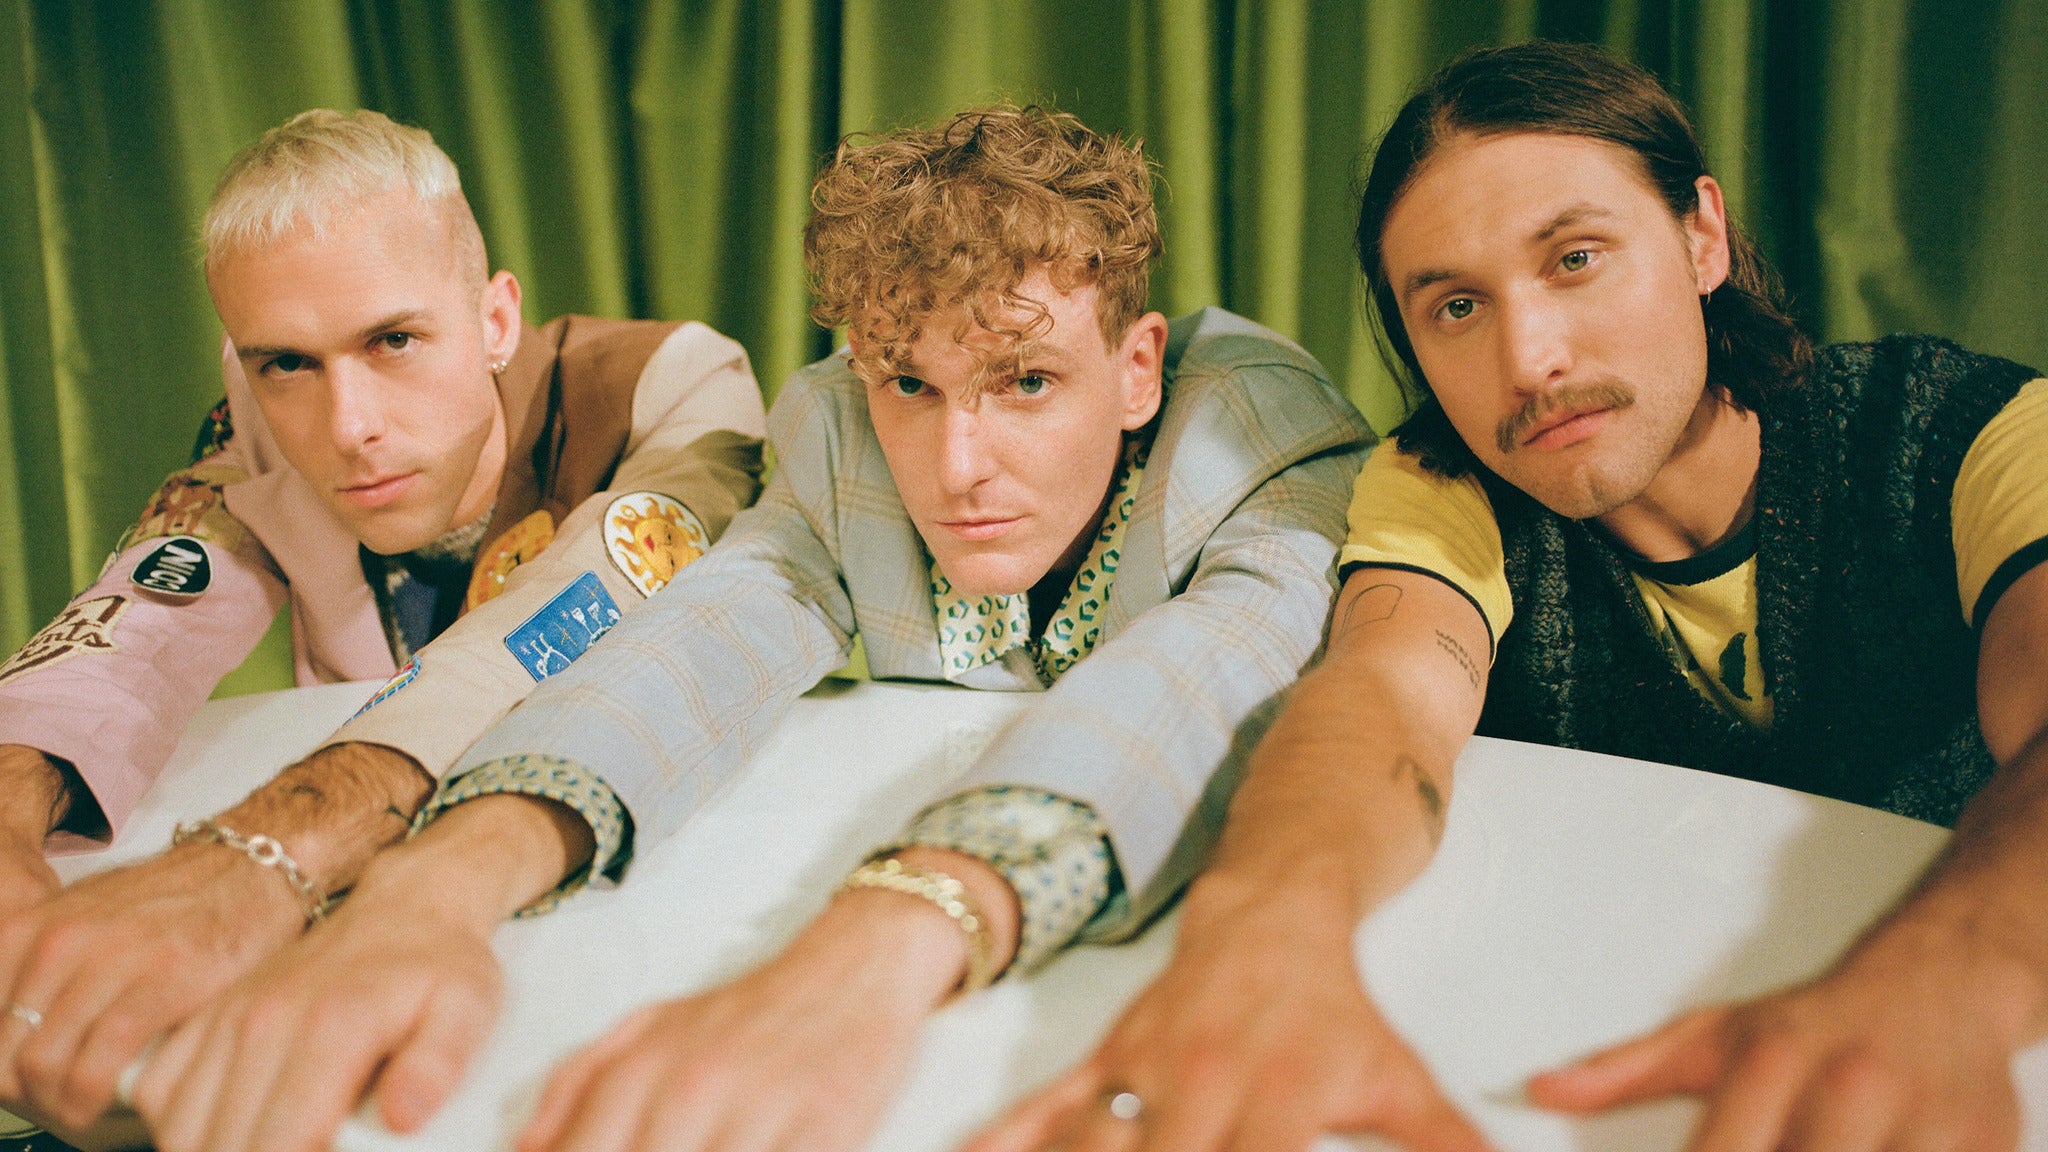 COIN: Rainbow Dreamland Tour in Philadelphia promo photo for VIP Package presale offer code